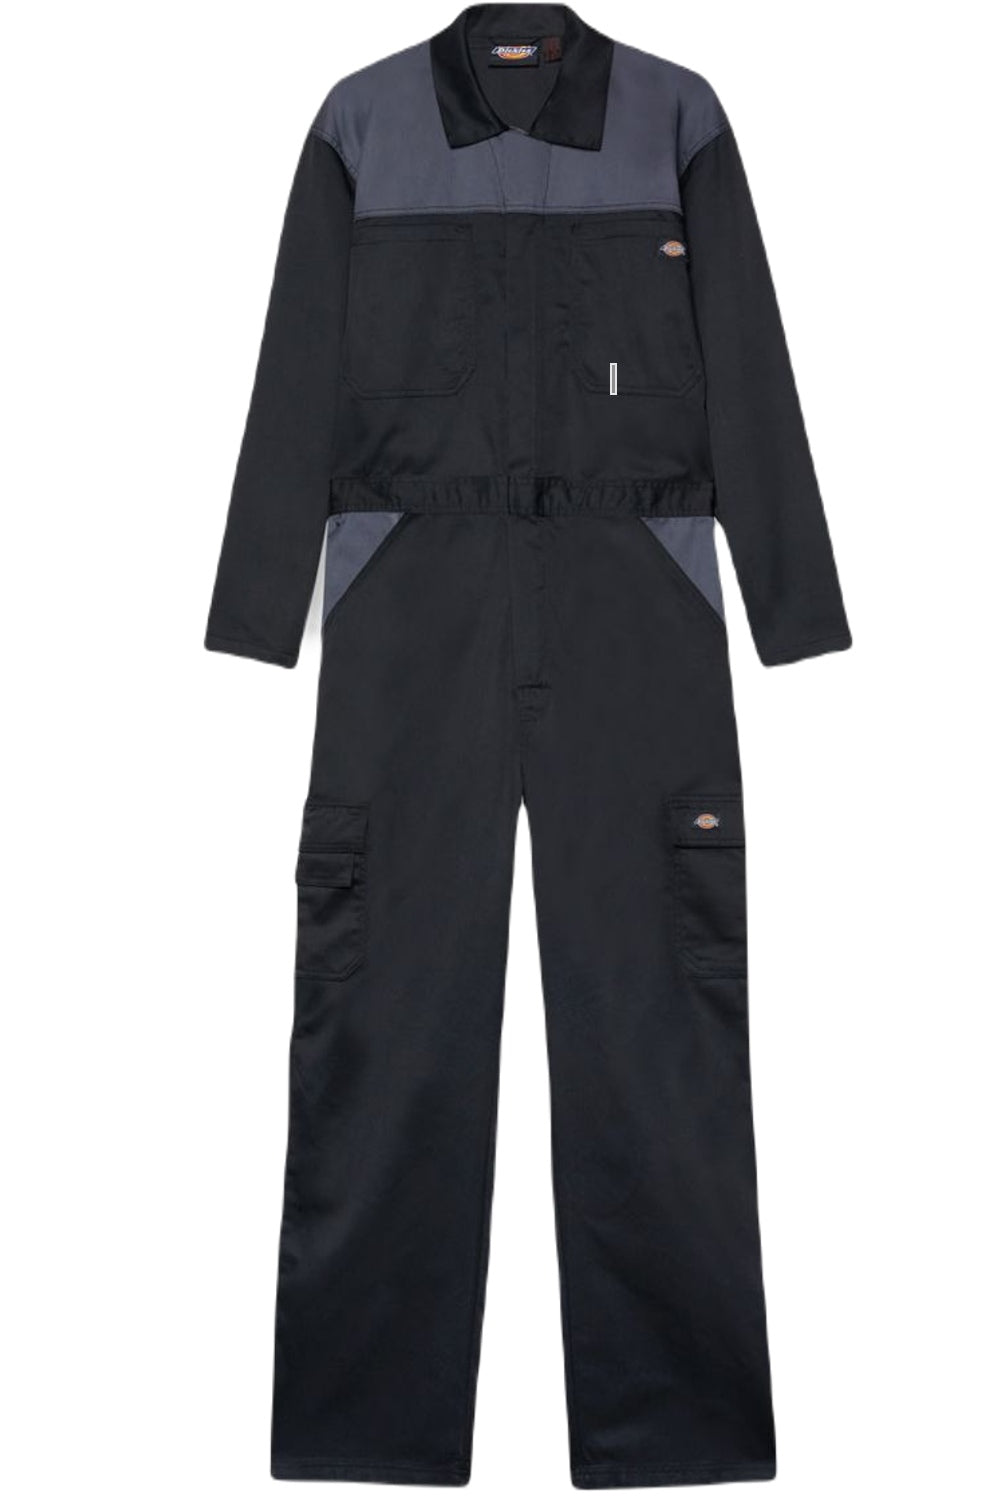 Dickies Everyday Coverall in Black/Grey 